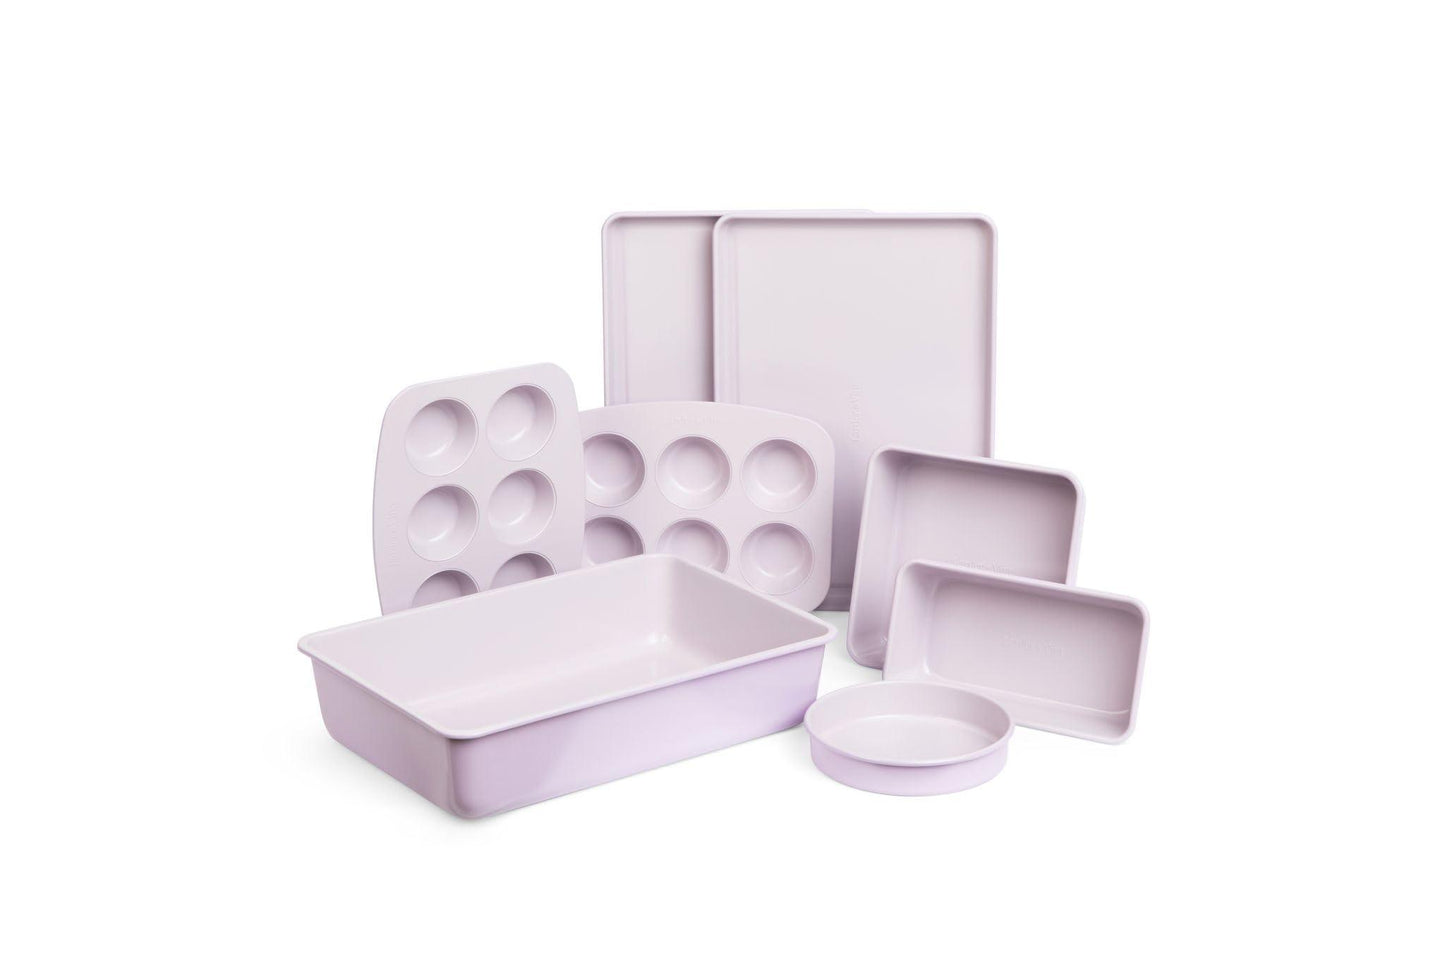 Larder & Vine Bakeware Set - PFAS/PFOS/PTFE Free, Heavy Duty Aluminized Steel with Ceramic Finish, Includes Sheet Pans, Loaf Pan, Muffin Tins, Round Pan, Square Pan, Roasting Pan (Lavender) - CookCave